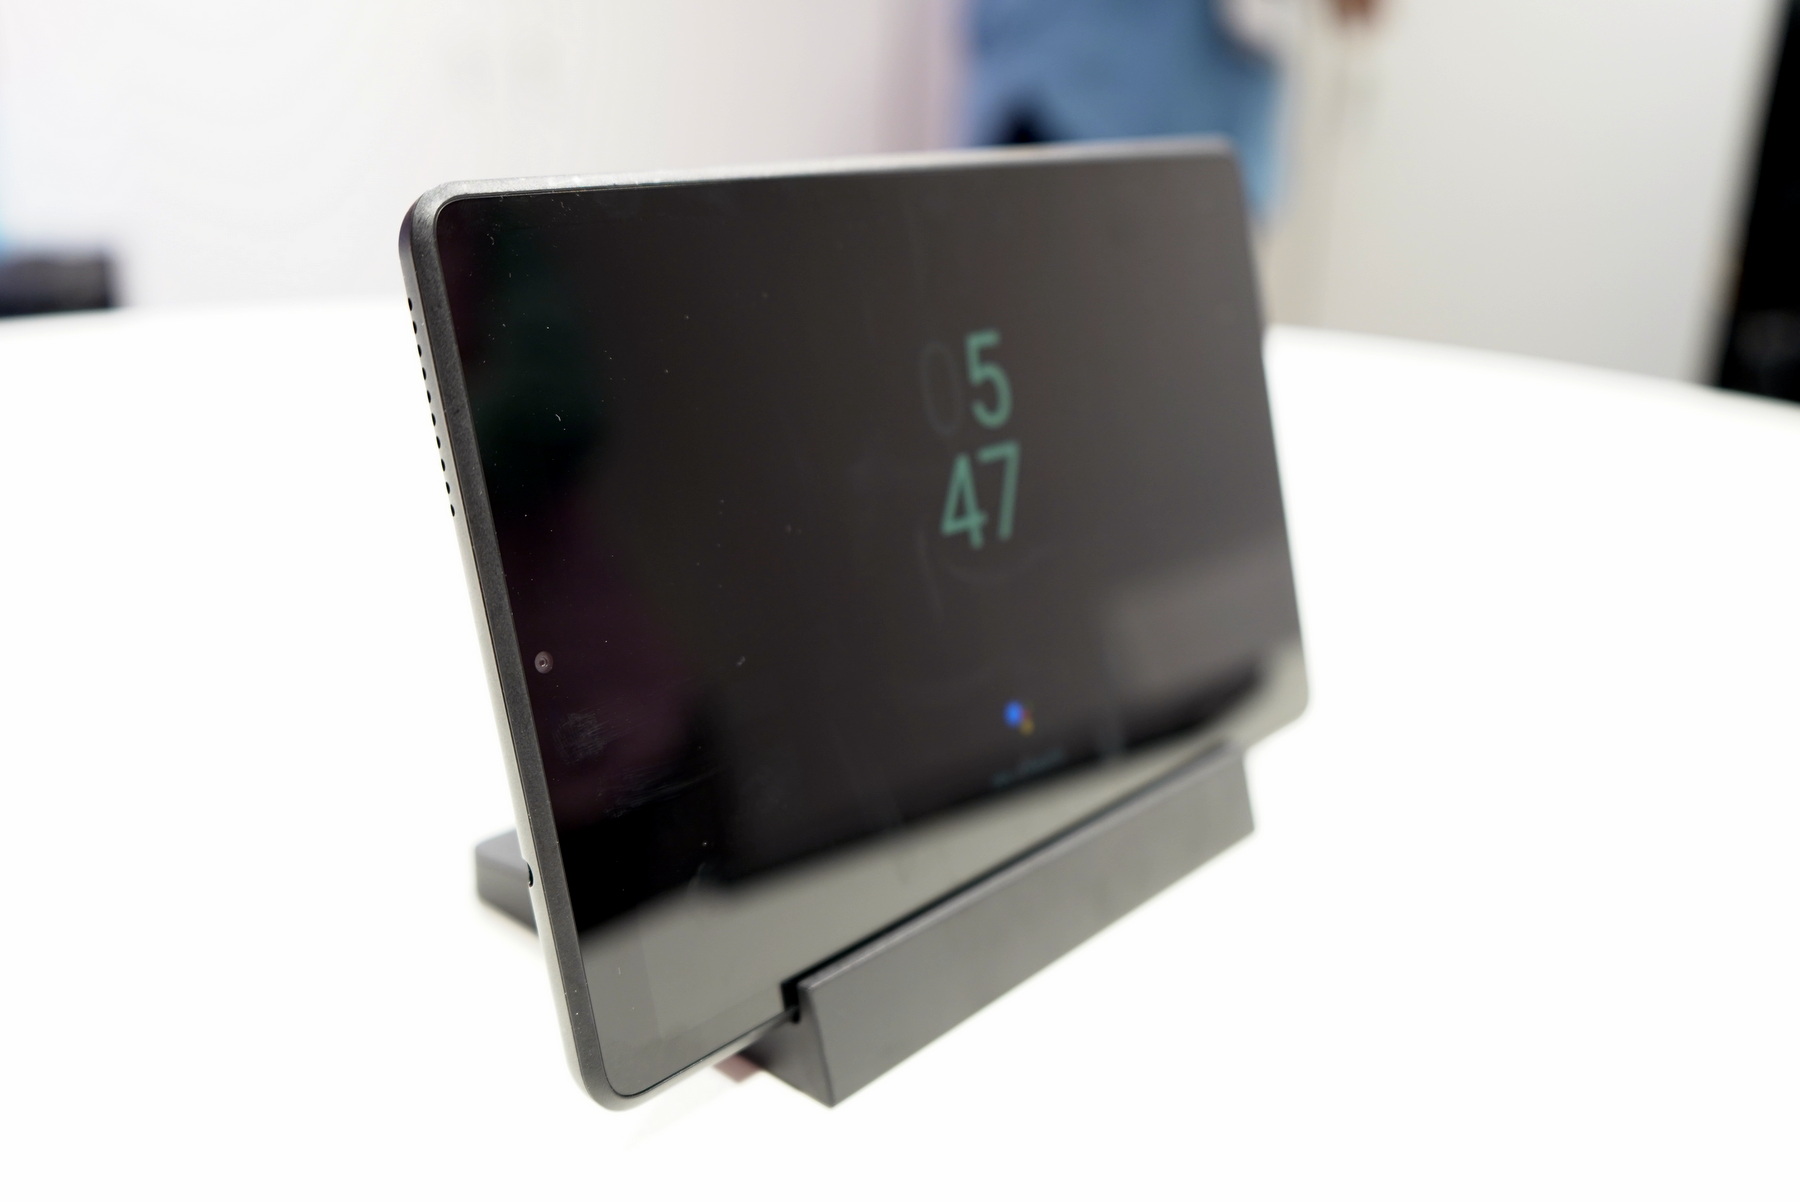 Lenovo Smart Tab M8 hands-on: the future of tablets – Phandroid